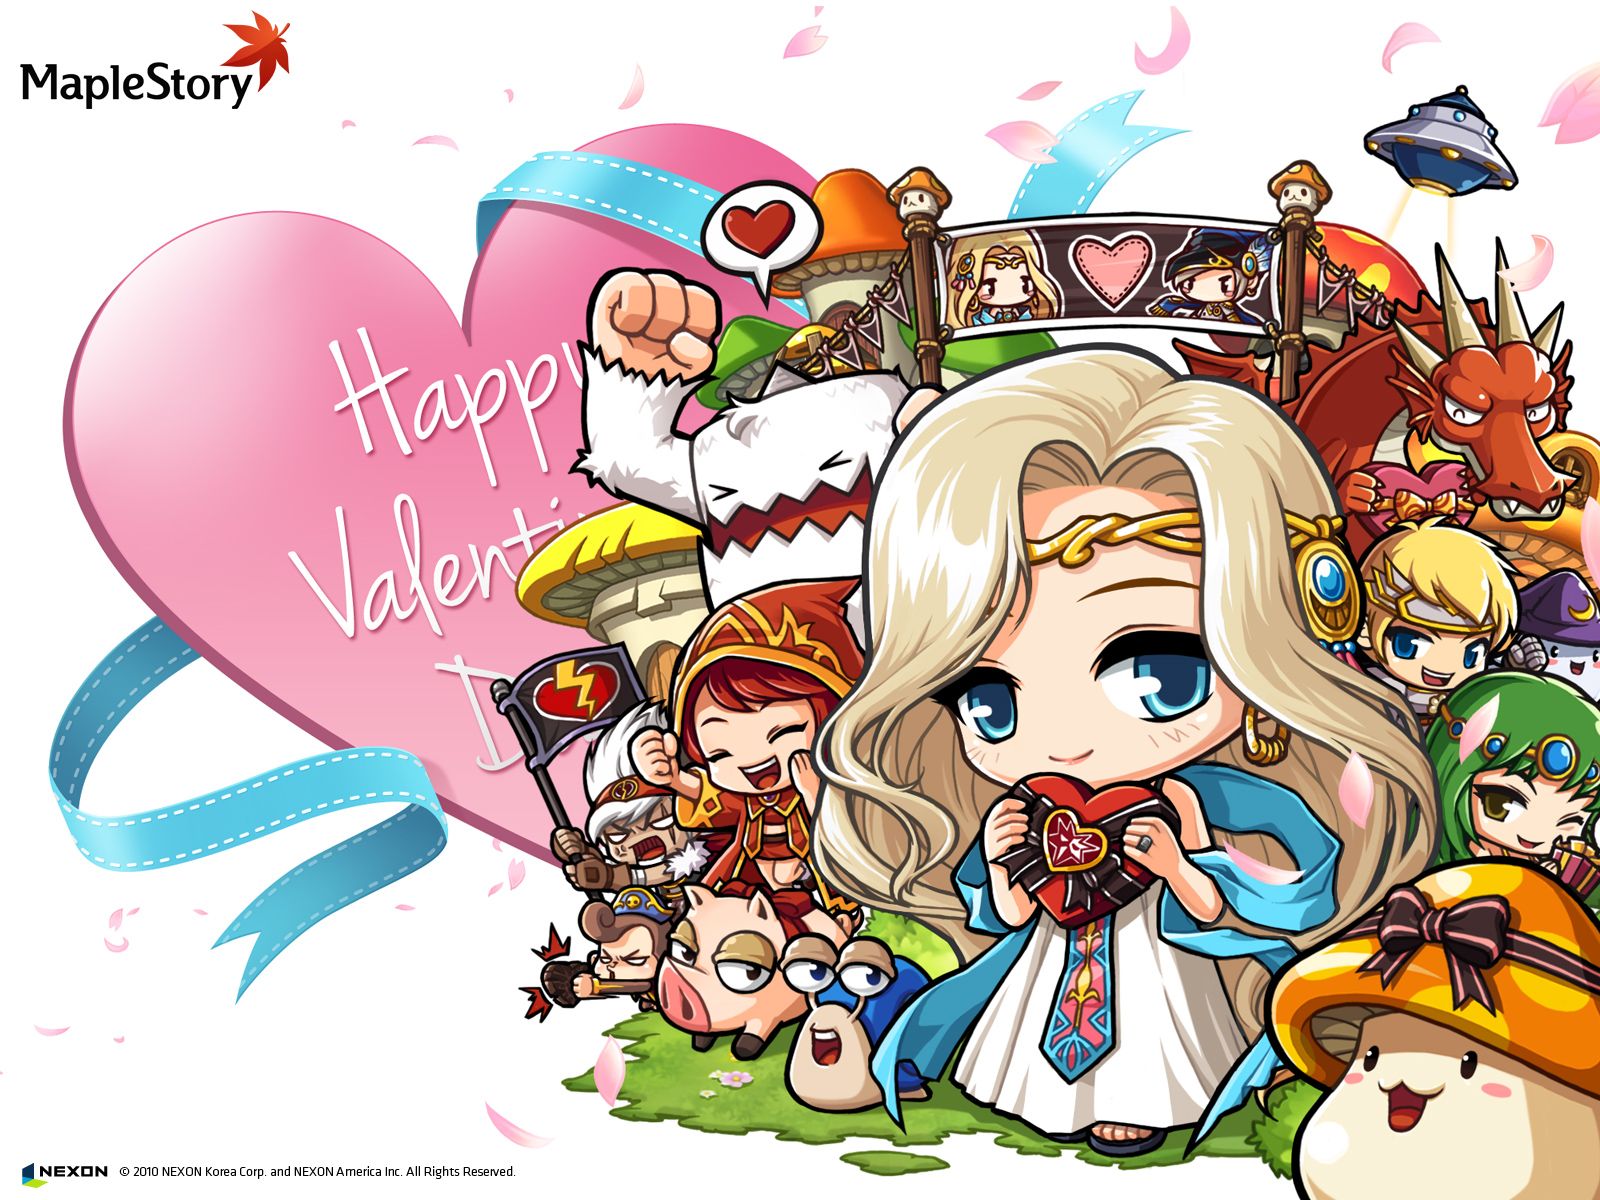 Maplestory Valentines Day Card - HD Wallpaper 